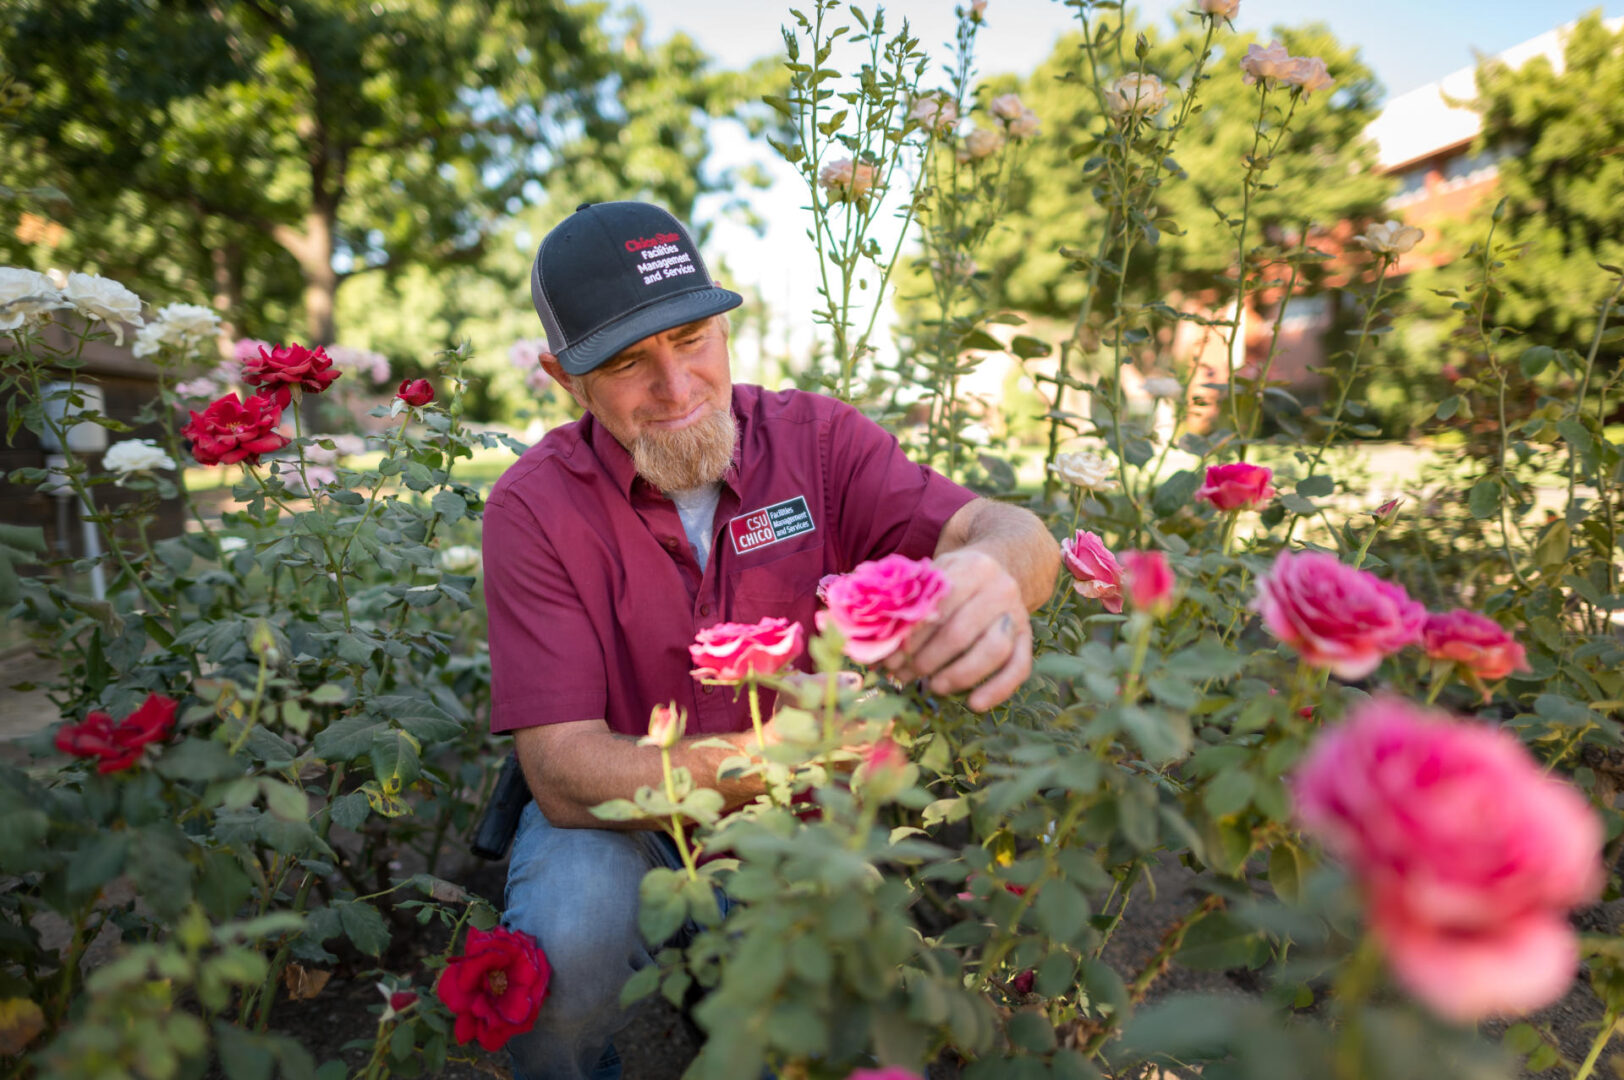 Thomas DuSell kneels to inspect a pink rose and is surrounded by red and white roses in Chico State's George Peterson Rose Garden.